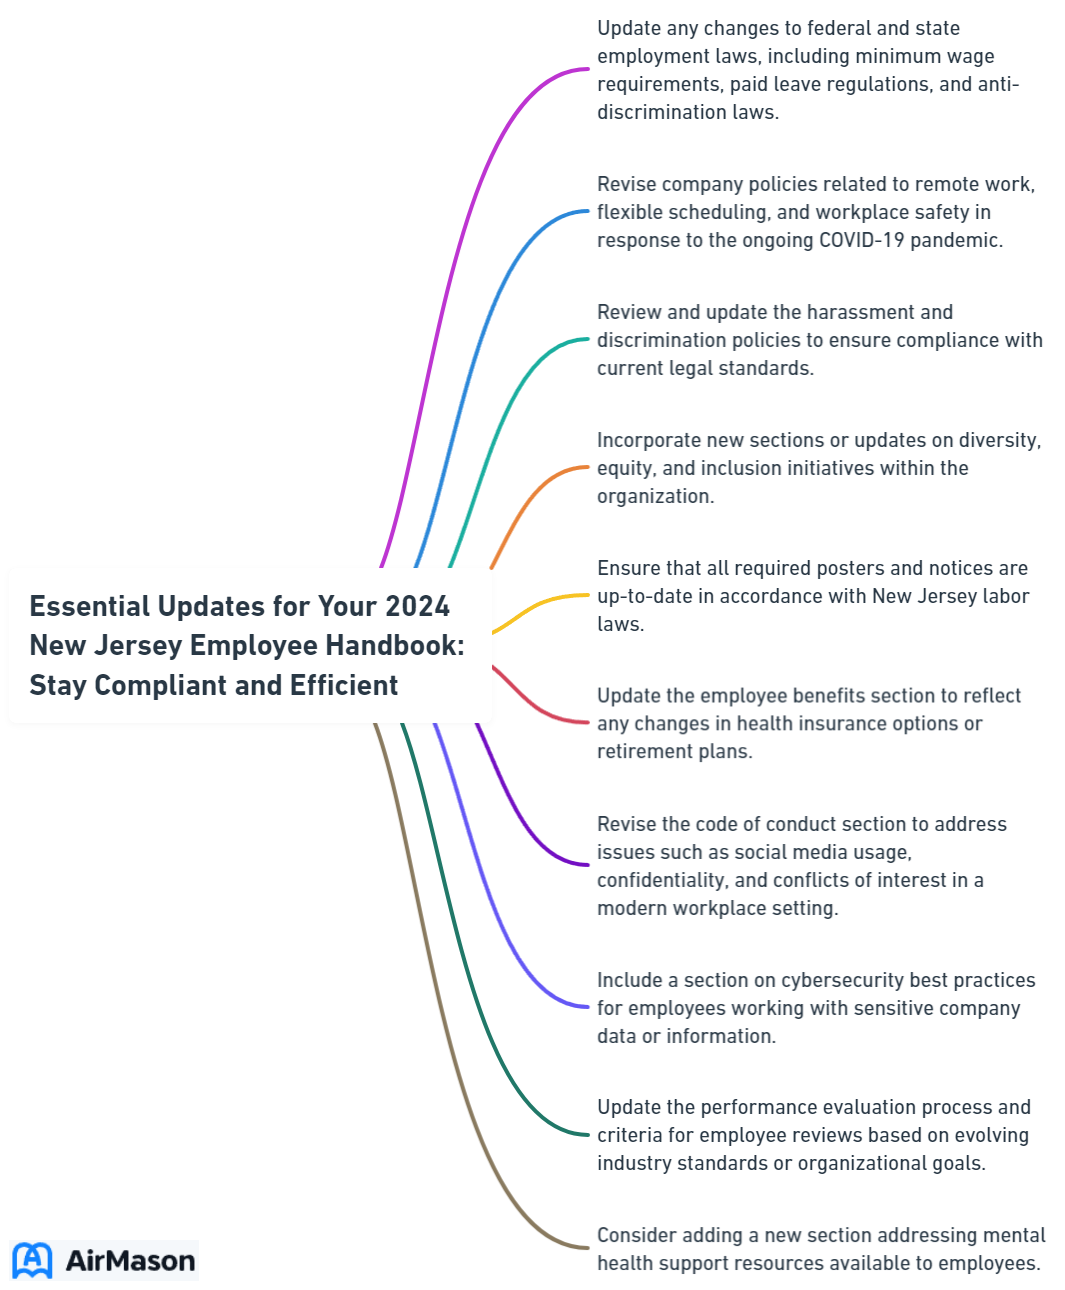 Essential Updates for Your 2024 New Jersey Employee Handbook: Stay Compliant and Efficient